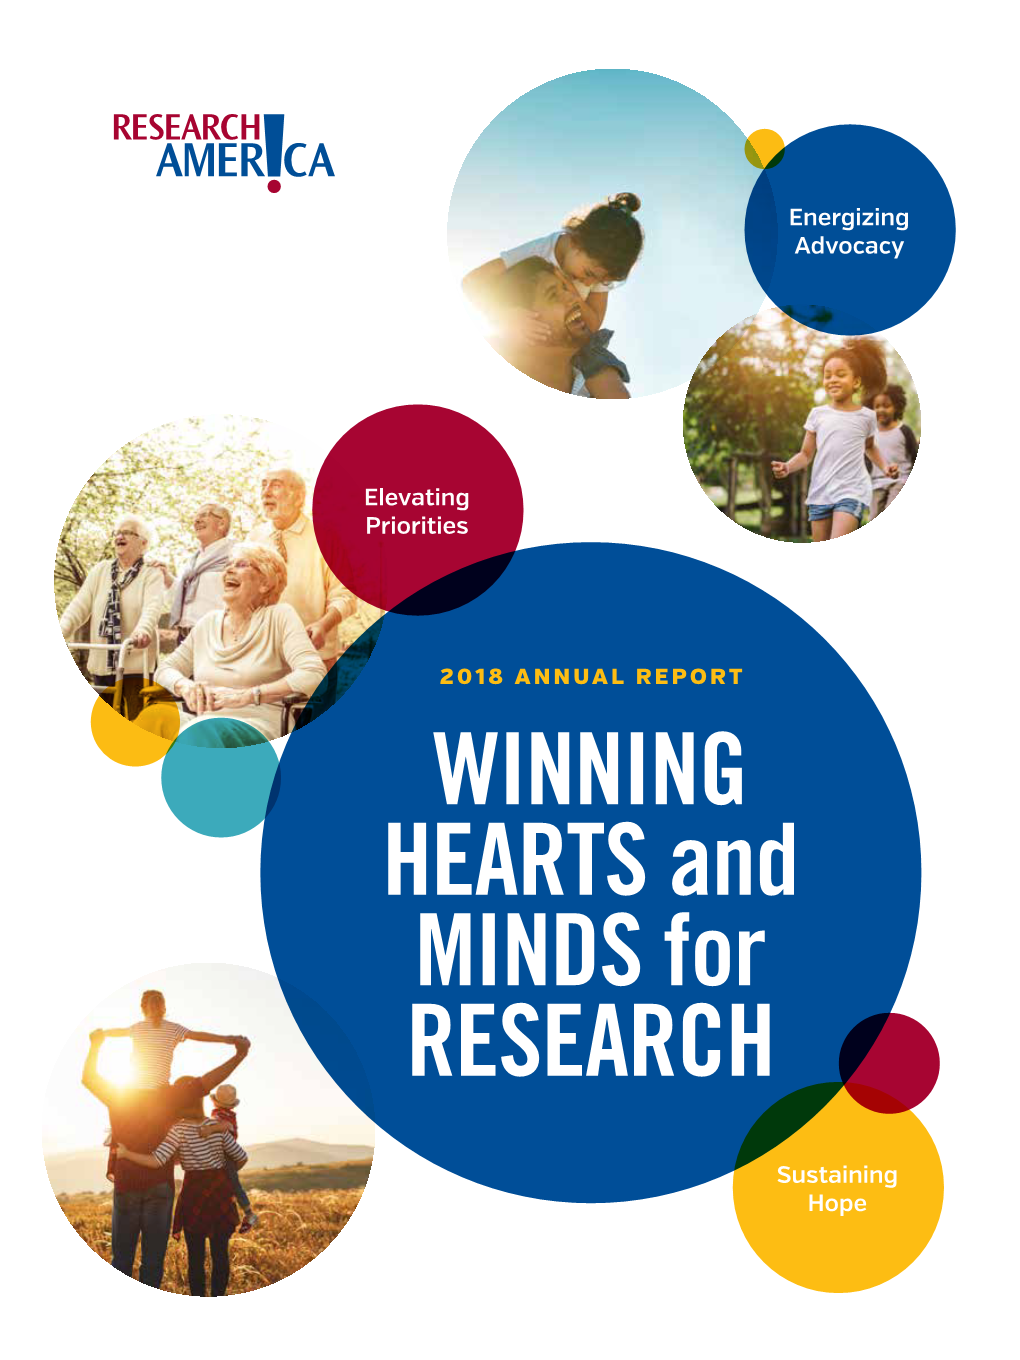 2018 ANNUAL REPORT WINNING HEARTS and MINDS for RESEARCH